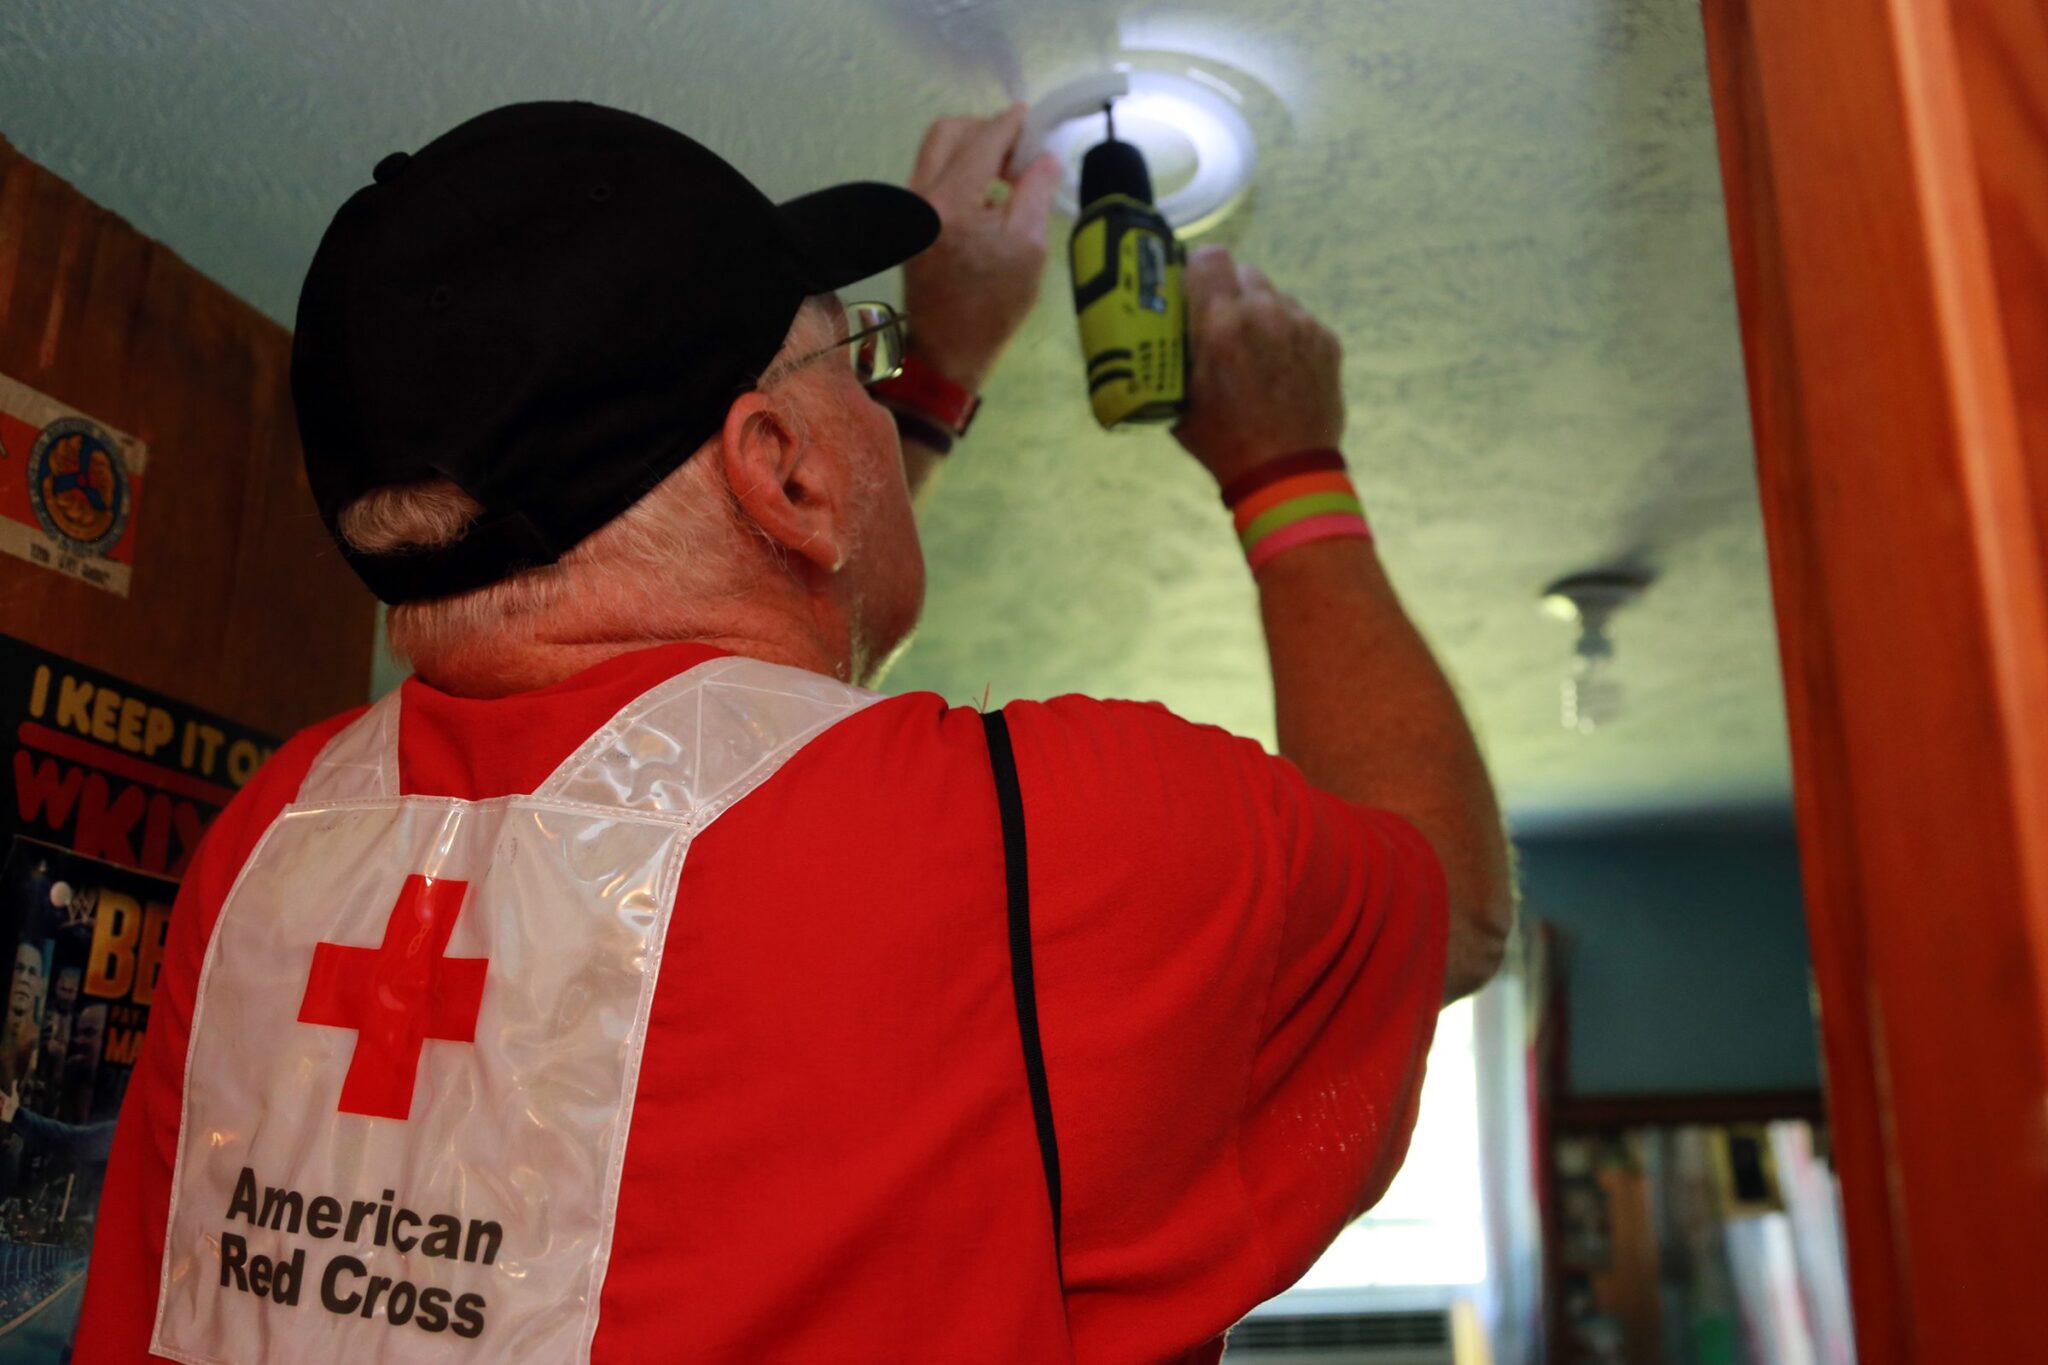 American Red Cross volunteer, Ray Henderson, installs a smoke detector in a BEC member’s home. According to the Red Cross, there should be smoke detectors in every bedroom and in the common living areas of the house.